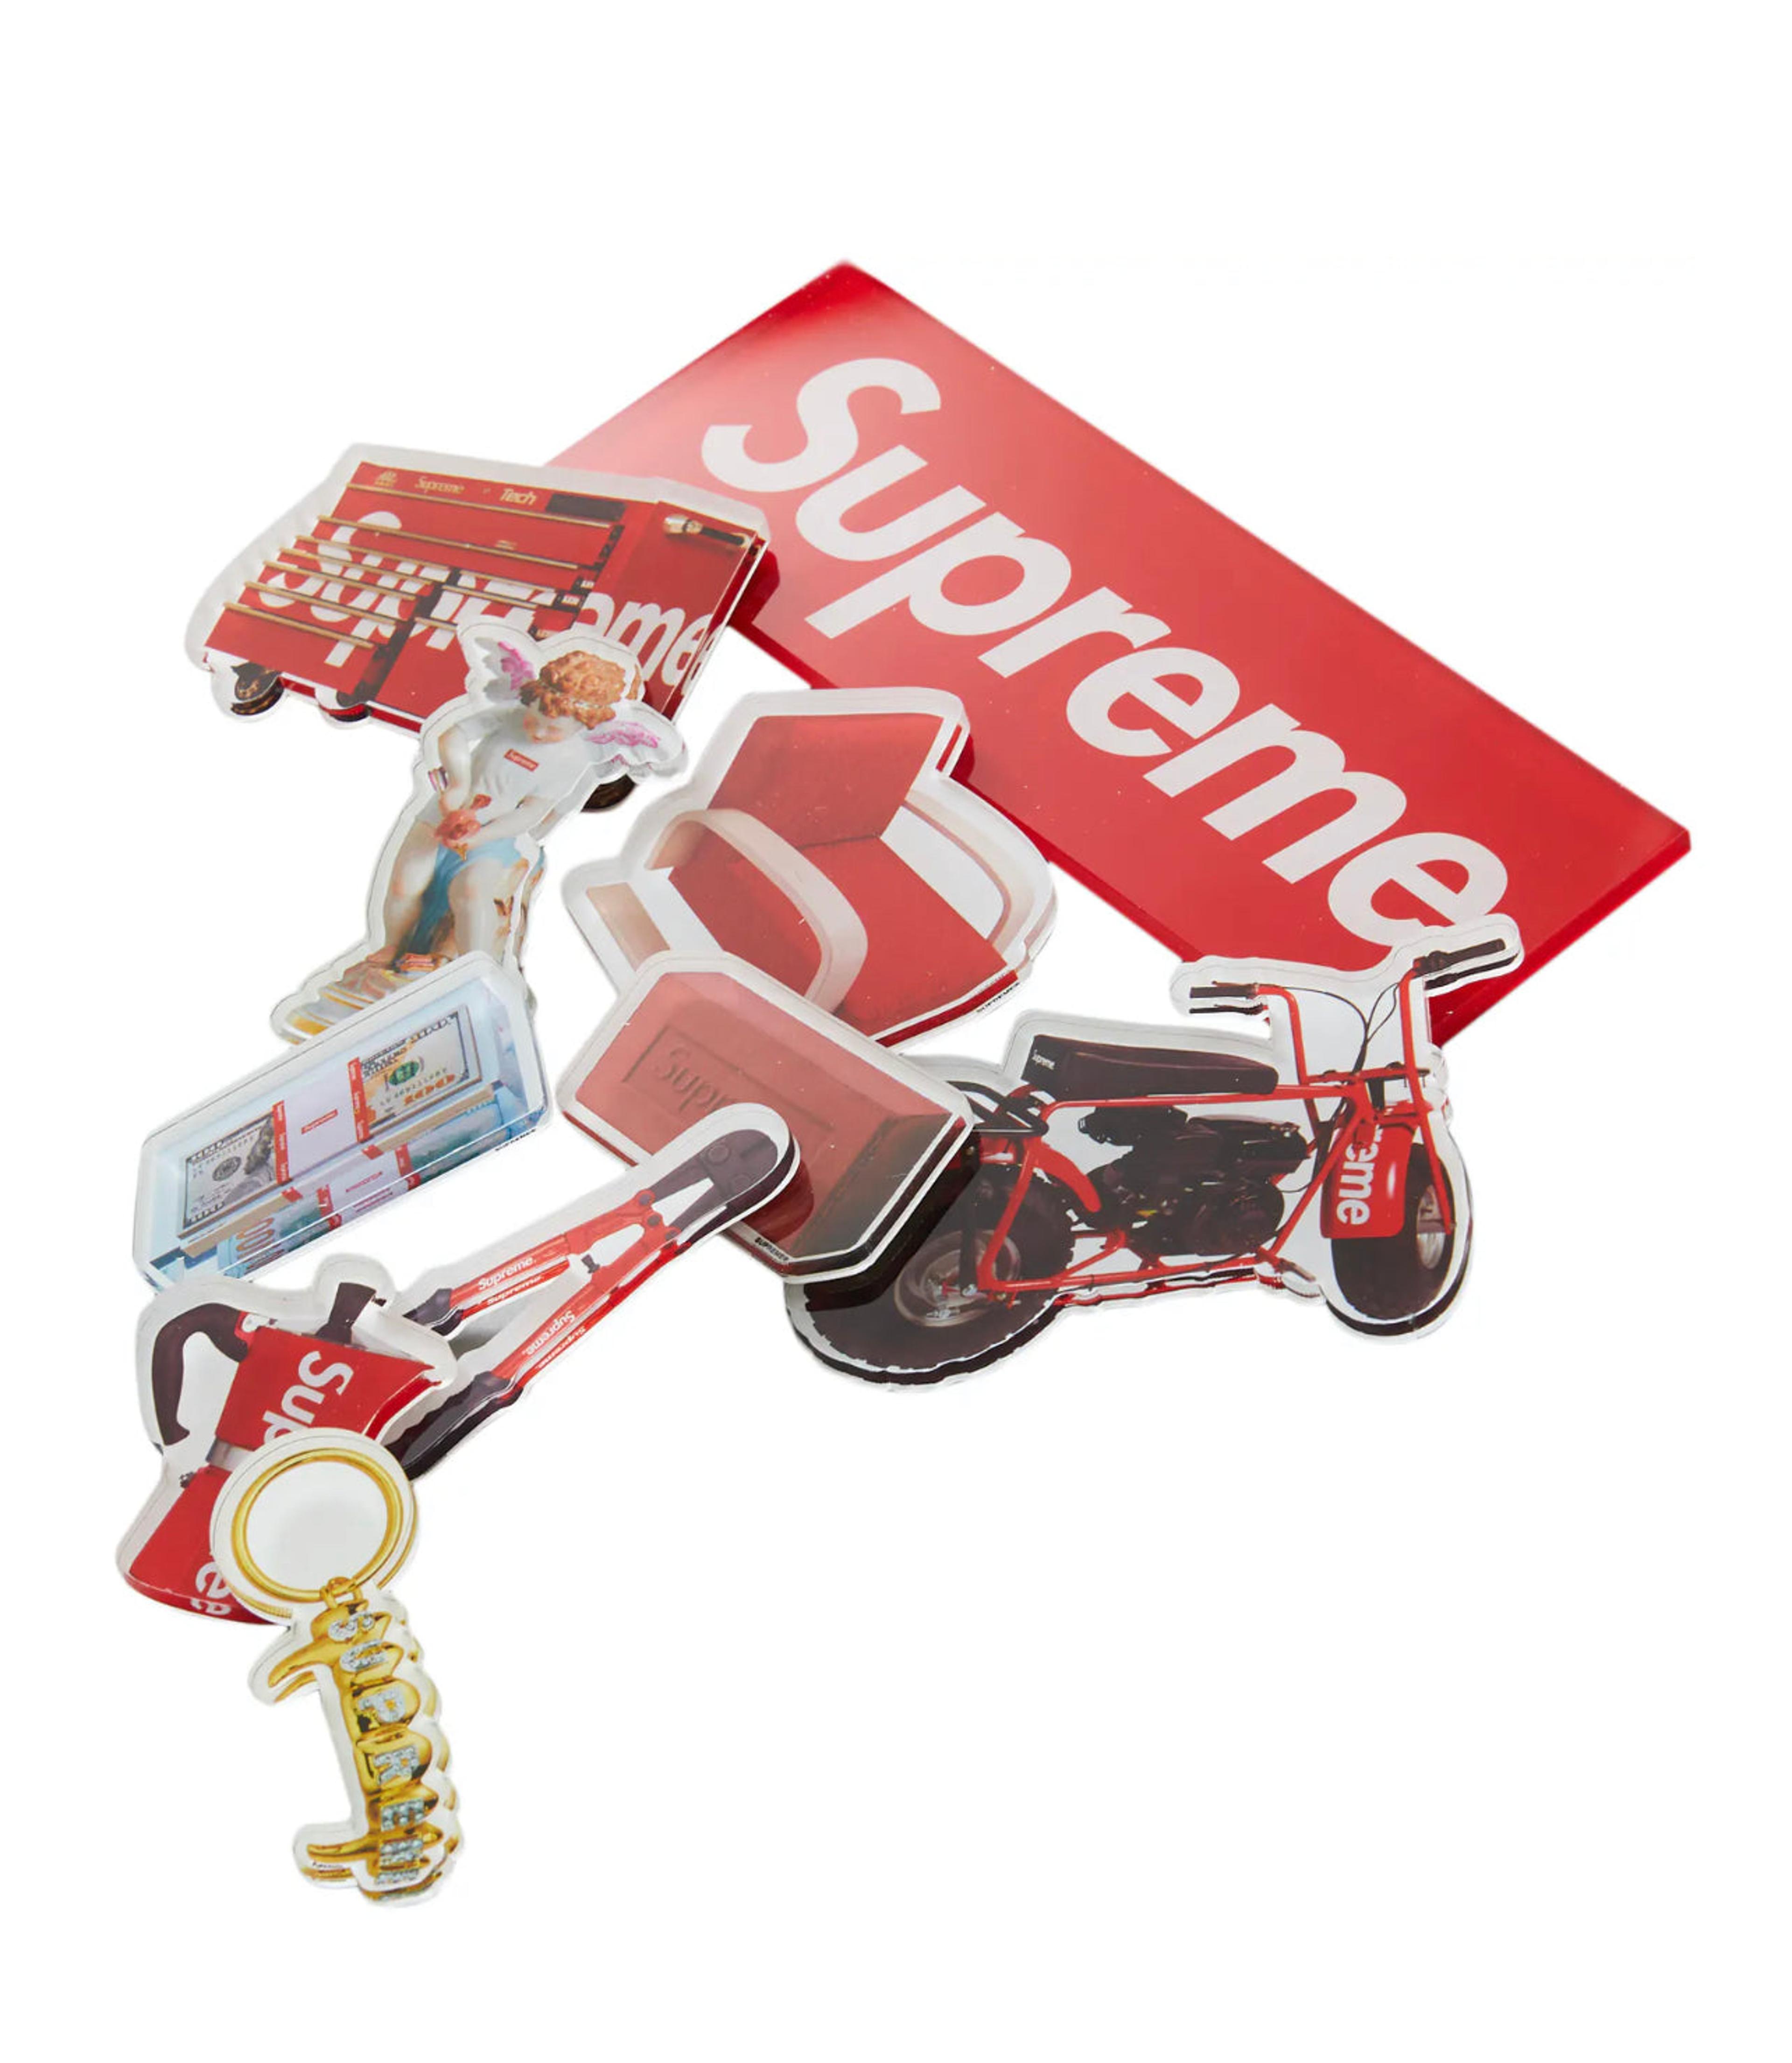 Alternate View 2 of Supreme Magnets